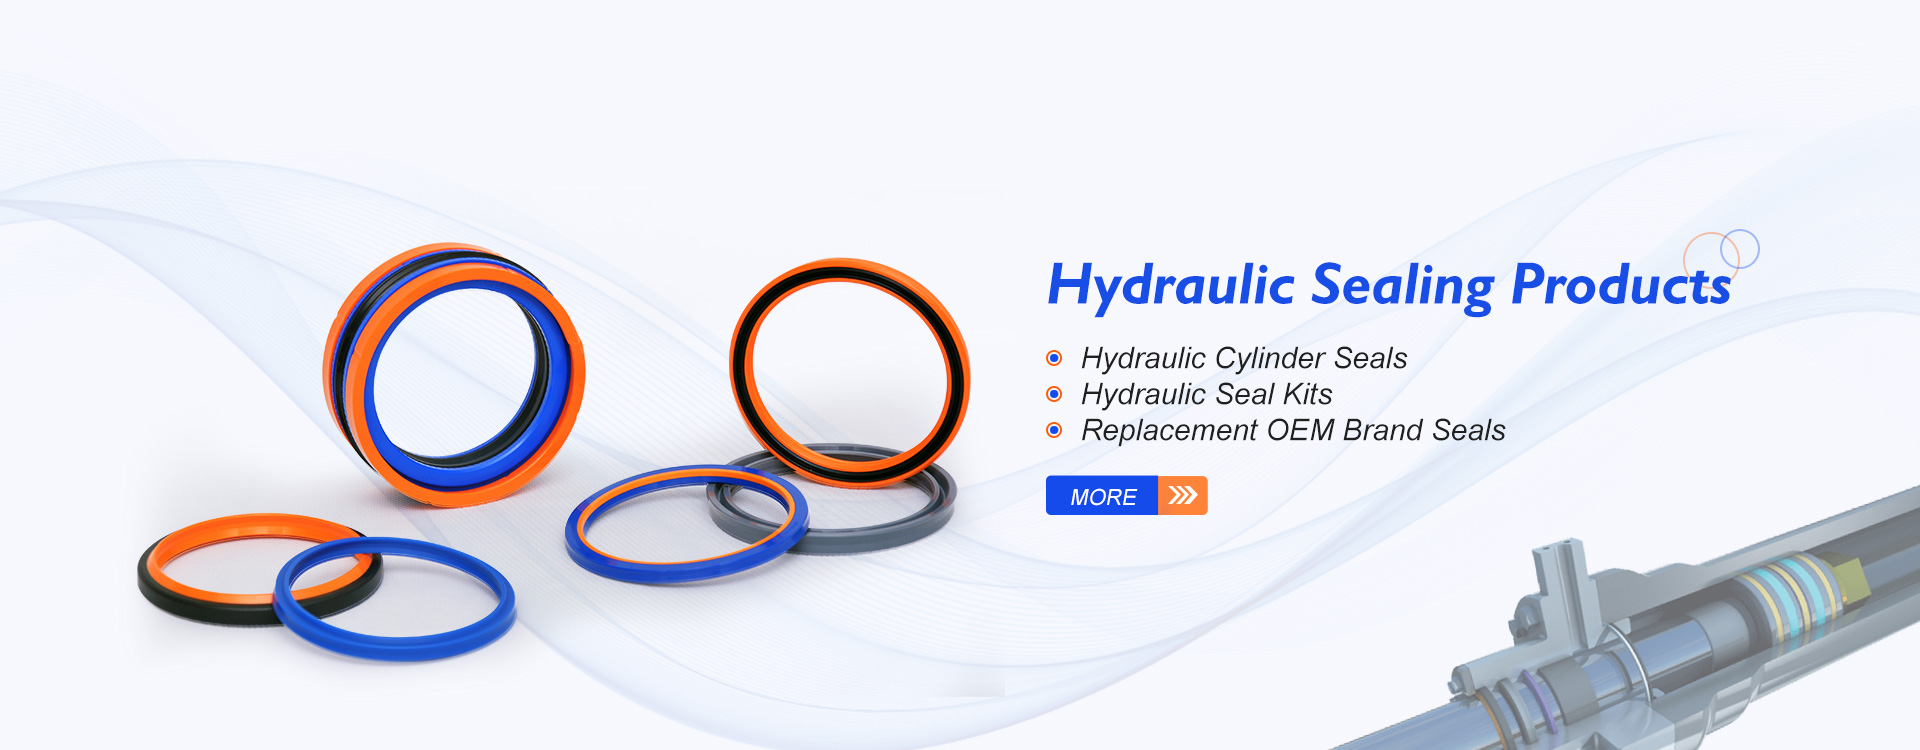 Hydraulic Sealing Products